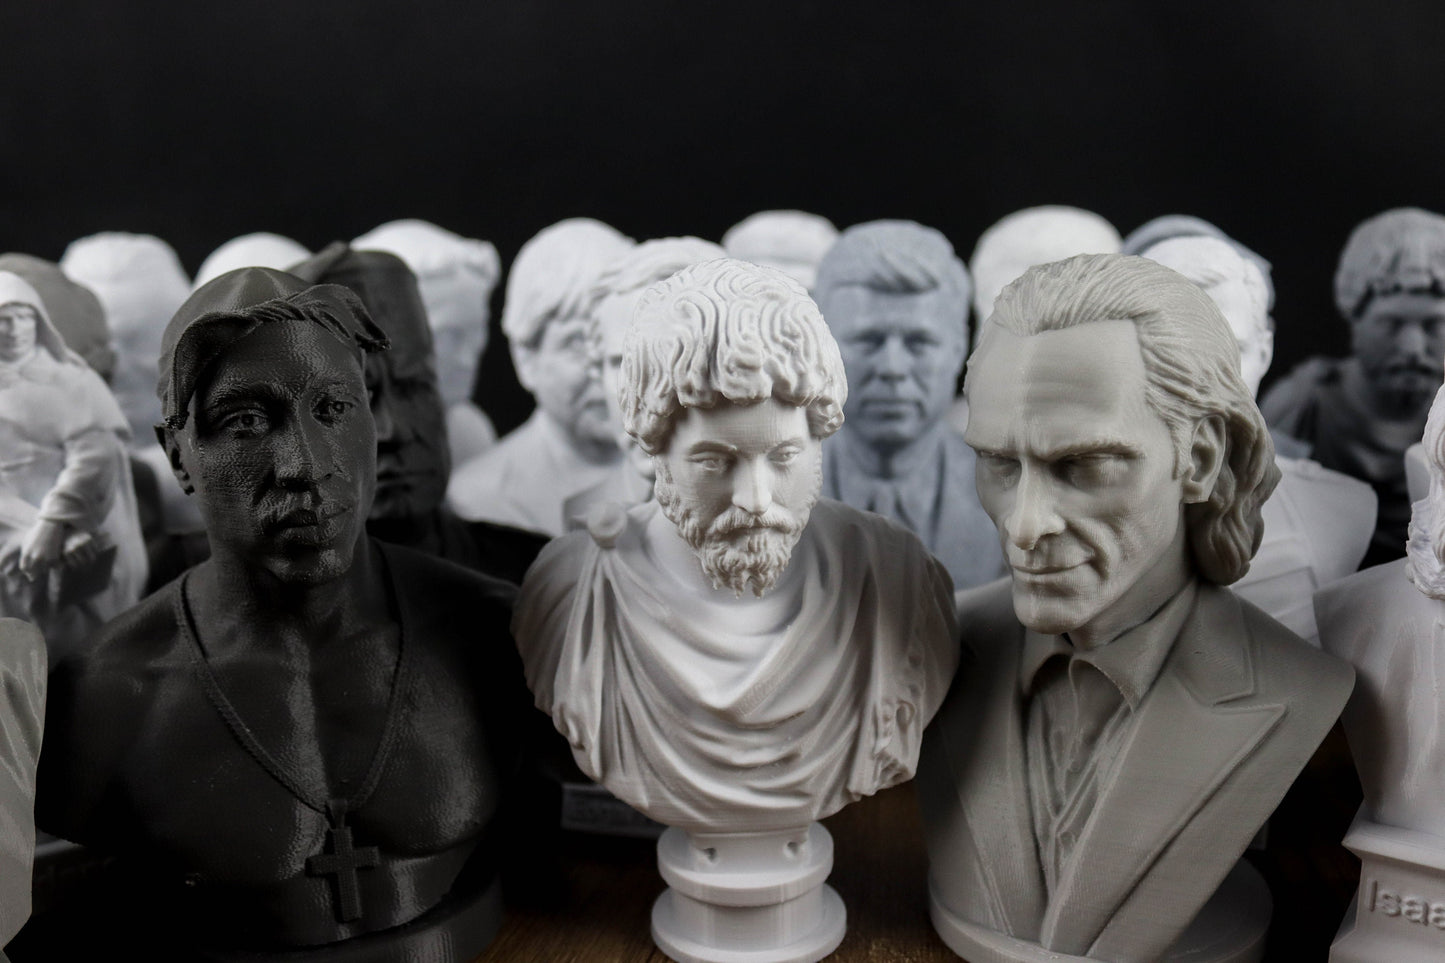 Pack of Busts: 5" Sculptures (from the existing stock), Shop clearance. Please read description !